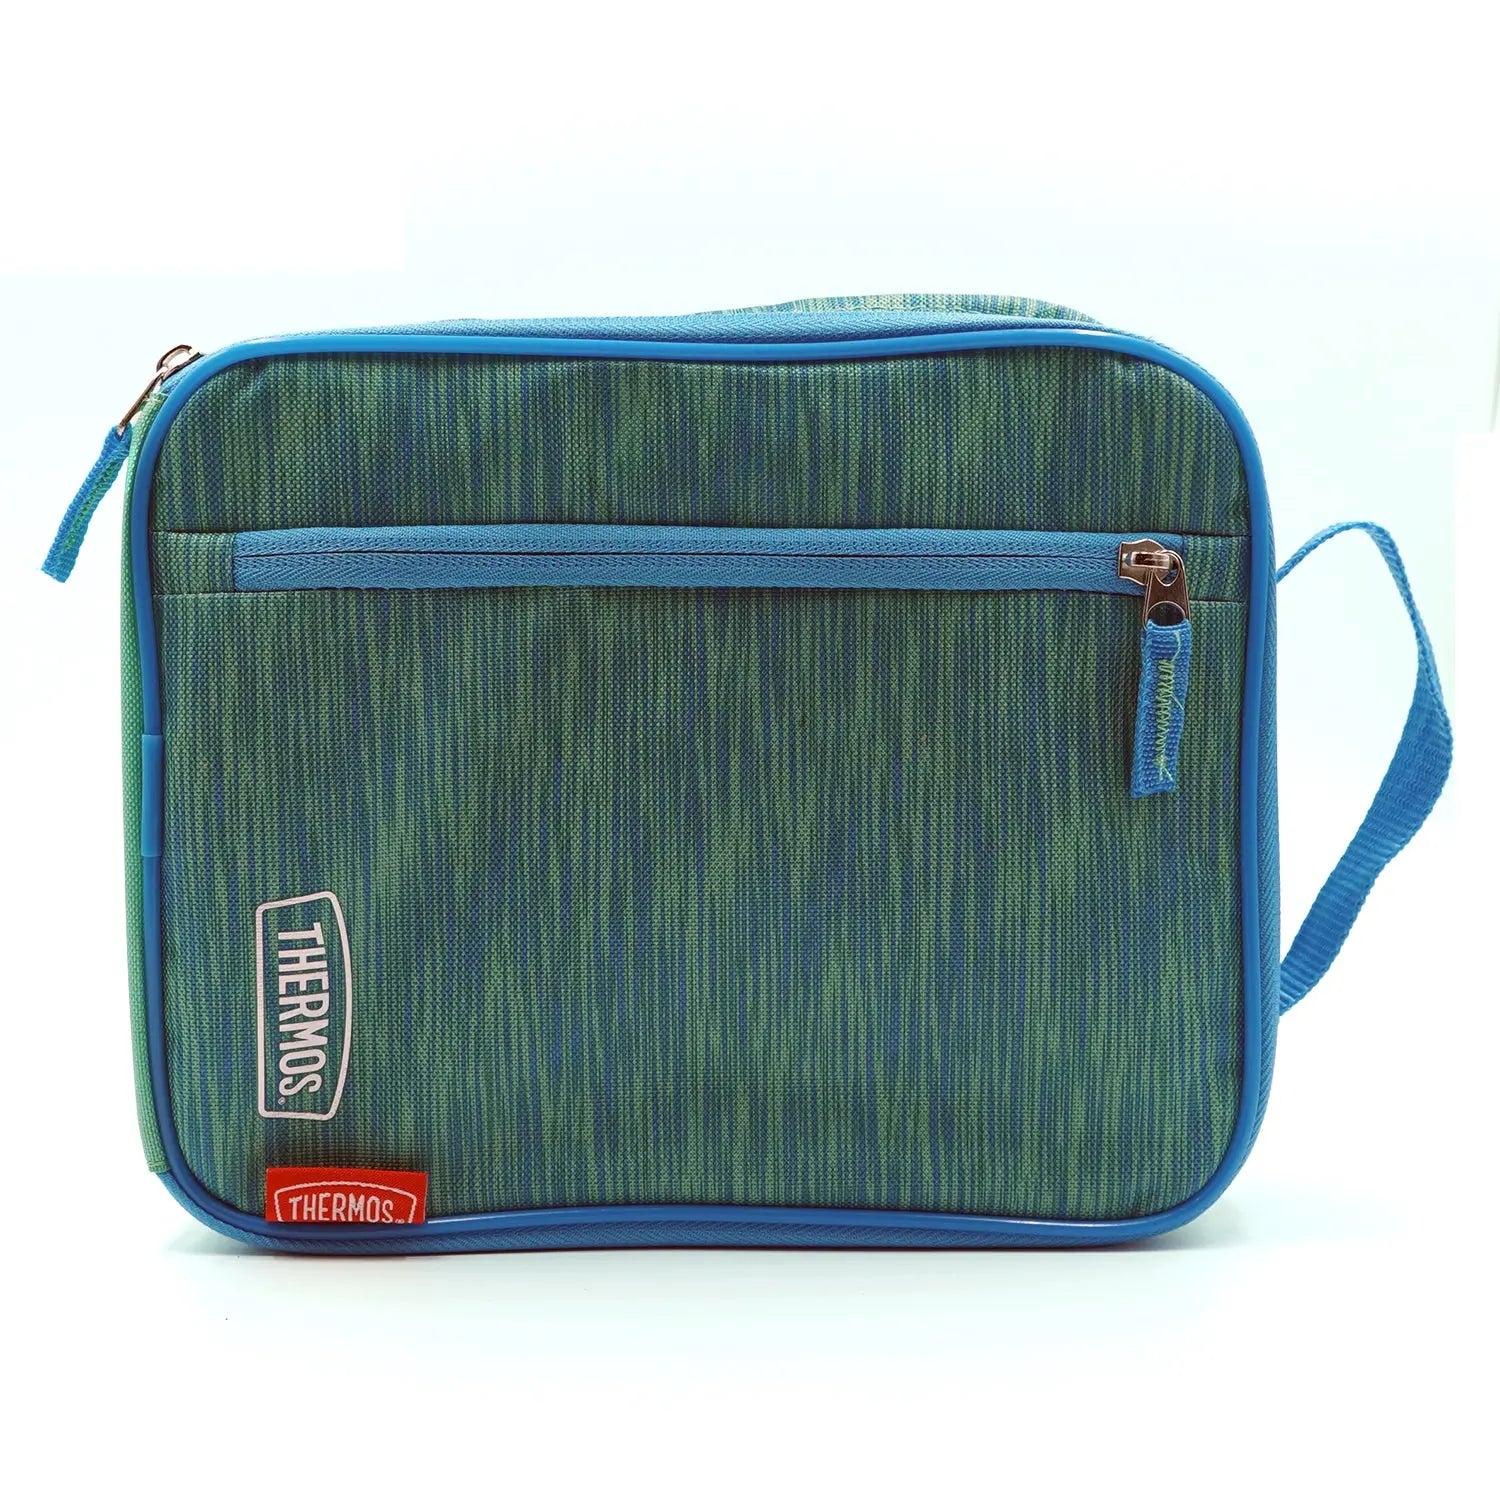 Thermos Kid's Upright Soft Lunch Box - Teal Thermos